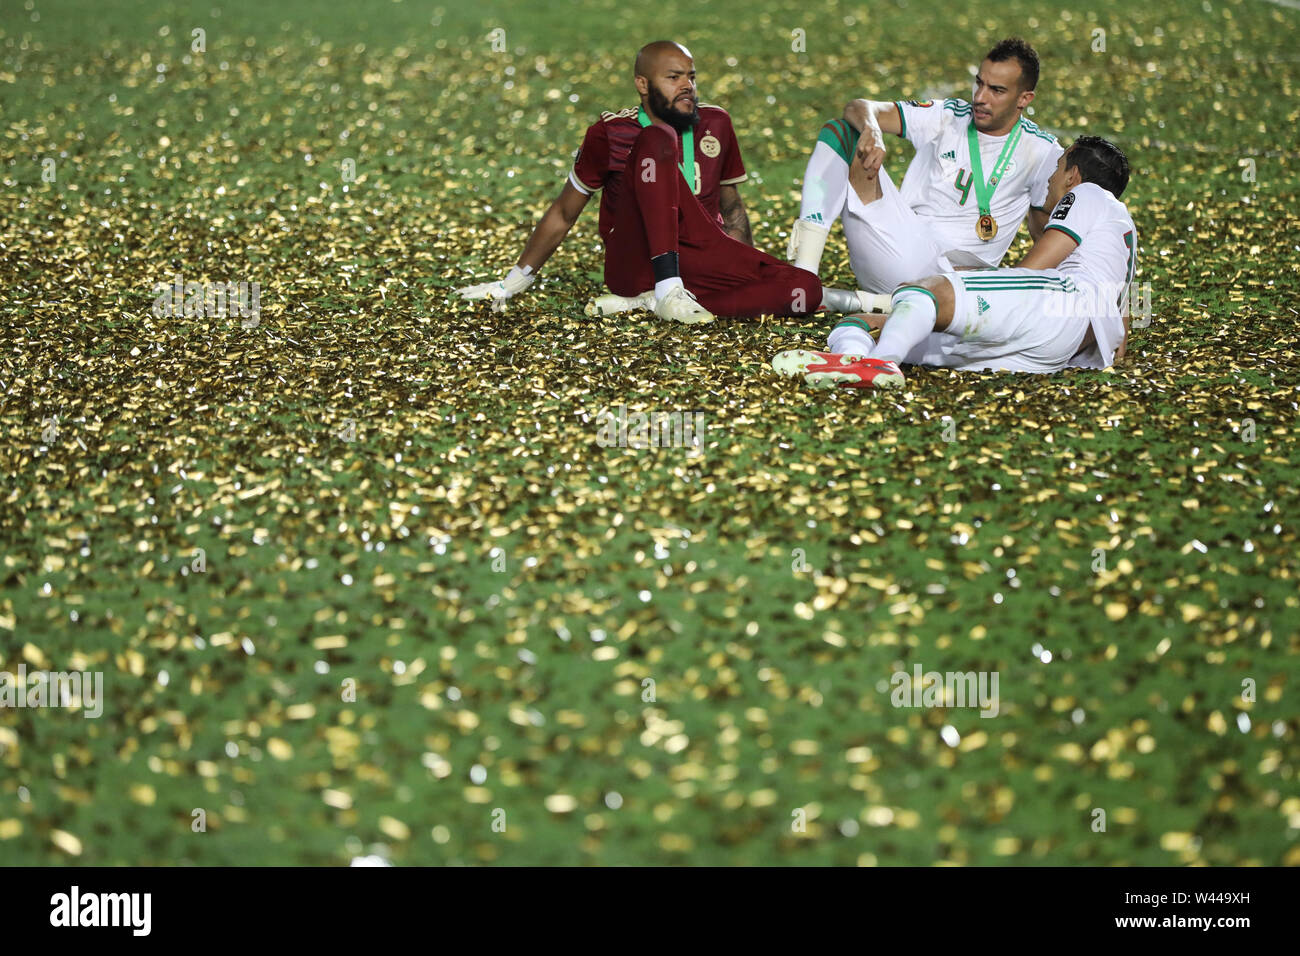 Cairo, Egypt. 19th July, 2019. Algeria's Rais M'Bolhi (L-R), Djamel Benlamri and Mehdi Zeffane celebrate with the trophy after Algeria defeated Senegal in the 2019 Africa Cup of Nations final soccer match at the Cairo International Stadium. Credit: Oliver Weiken/dpa/Alamy Live News Stock Photo